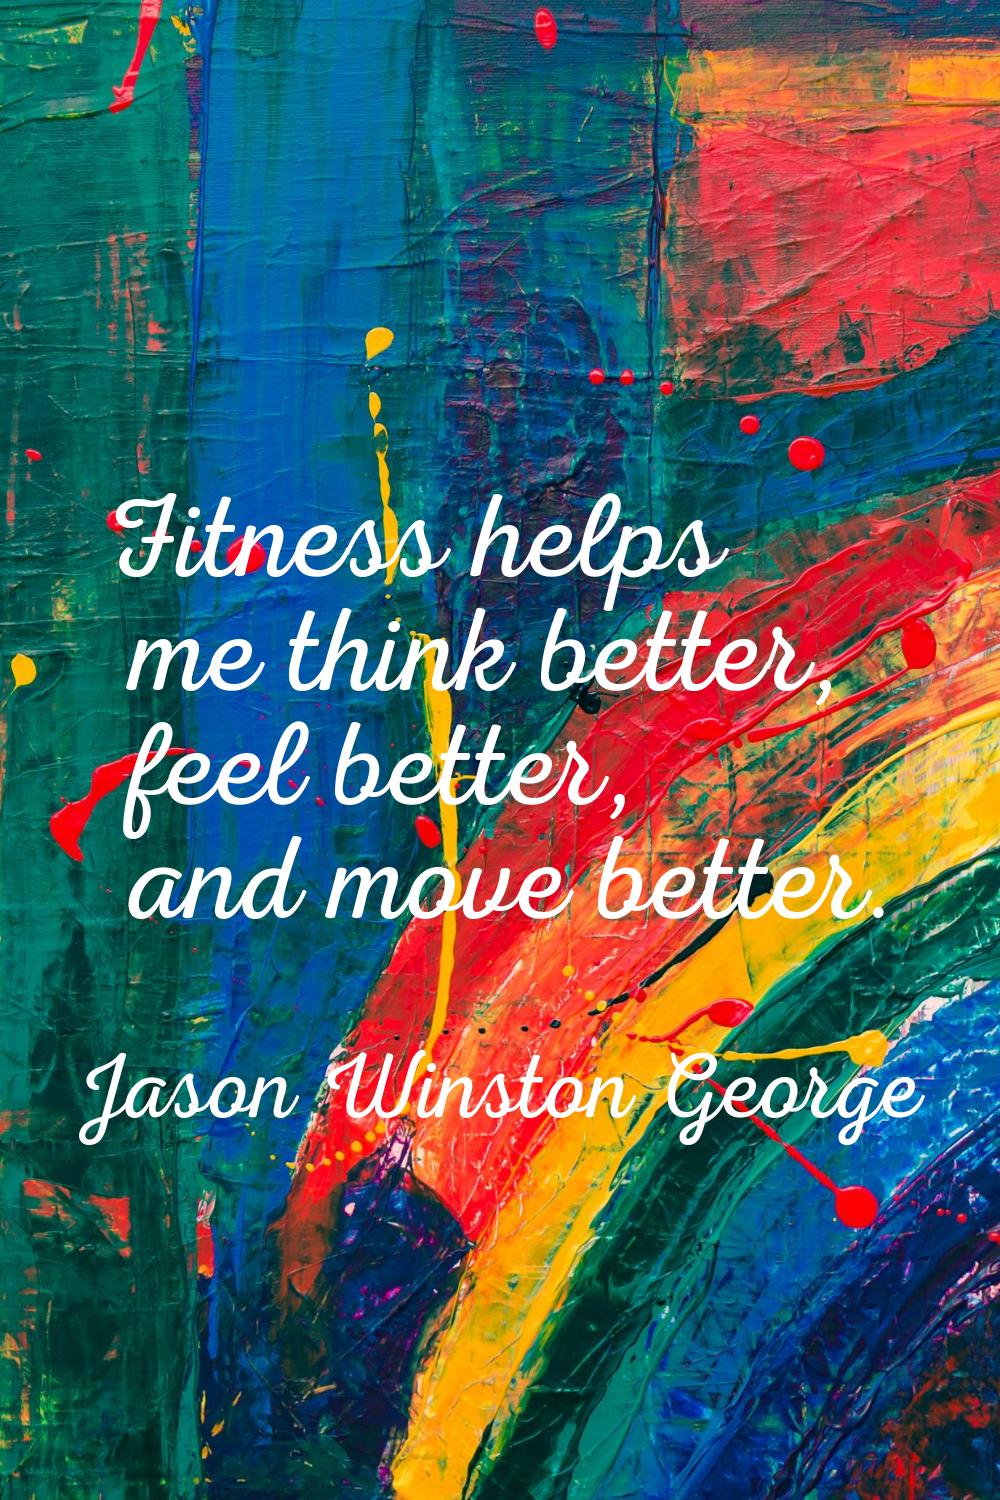 Fitness helps me think better, feel better, and move better.